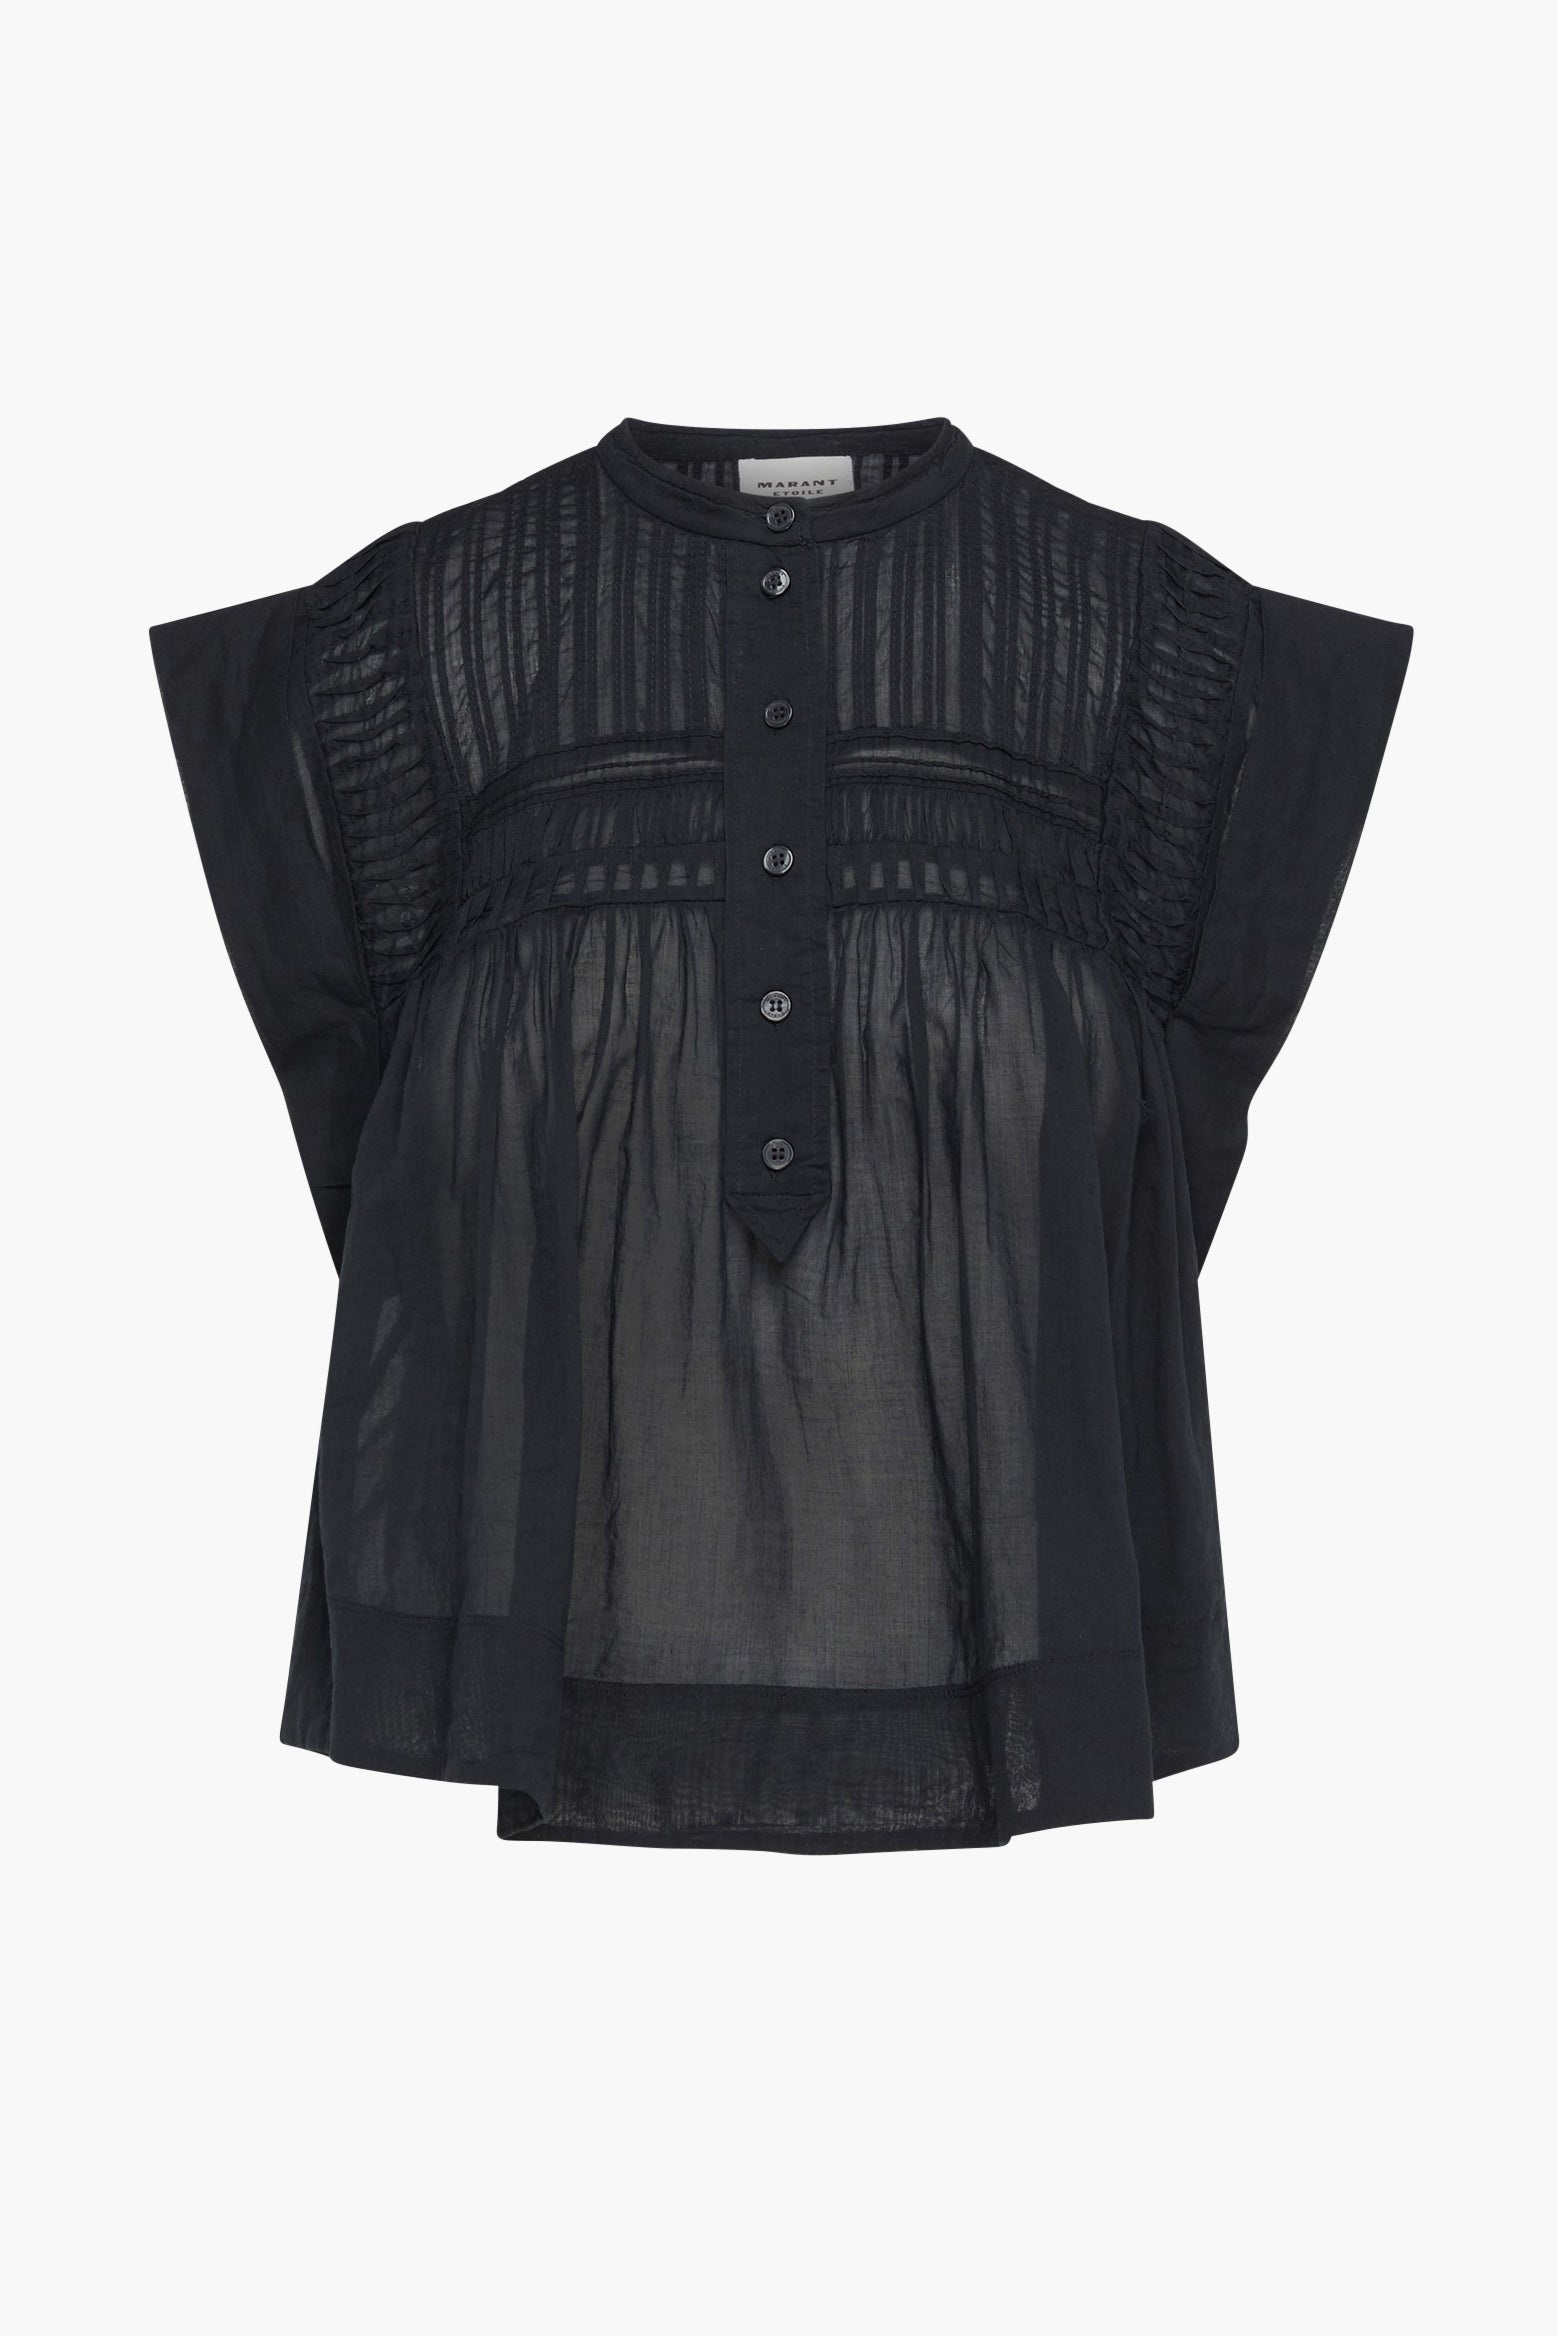 Isabel Marant Etoile Leaza Top in Black available at TNT The New Trend Australia. Free shipping on orders over $300 AUD.